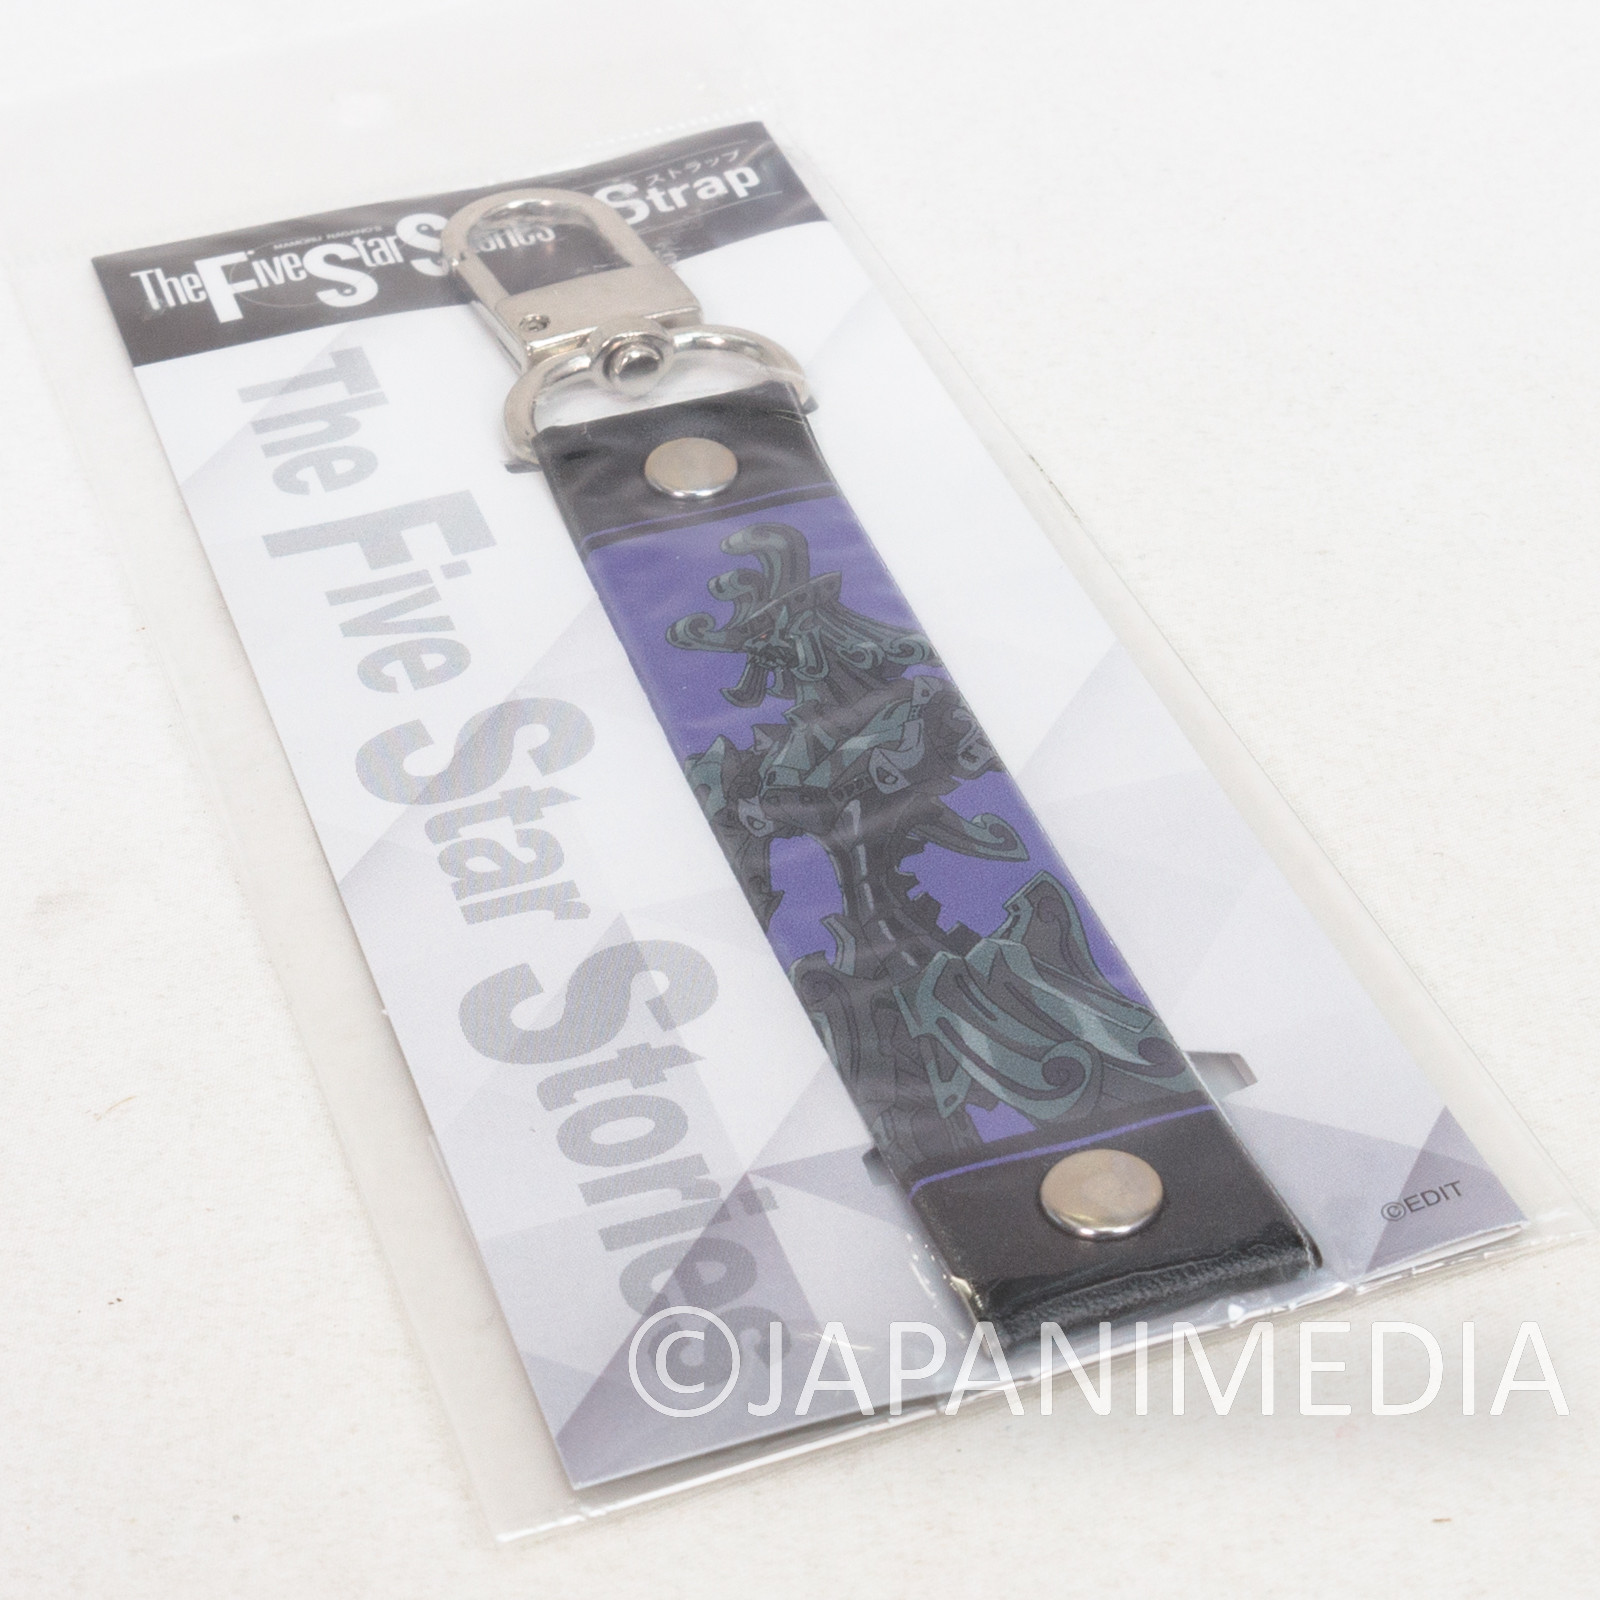 Five Star Stories Daccas the Black Knight Charm Keychain JAPAN ANIME